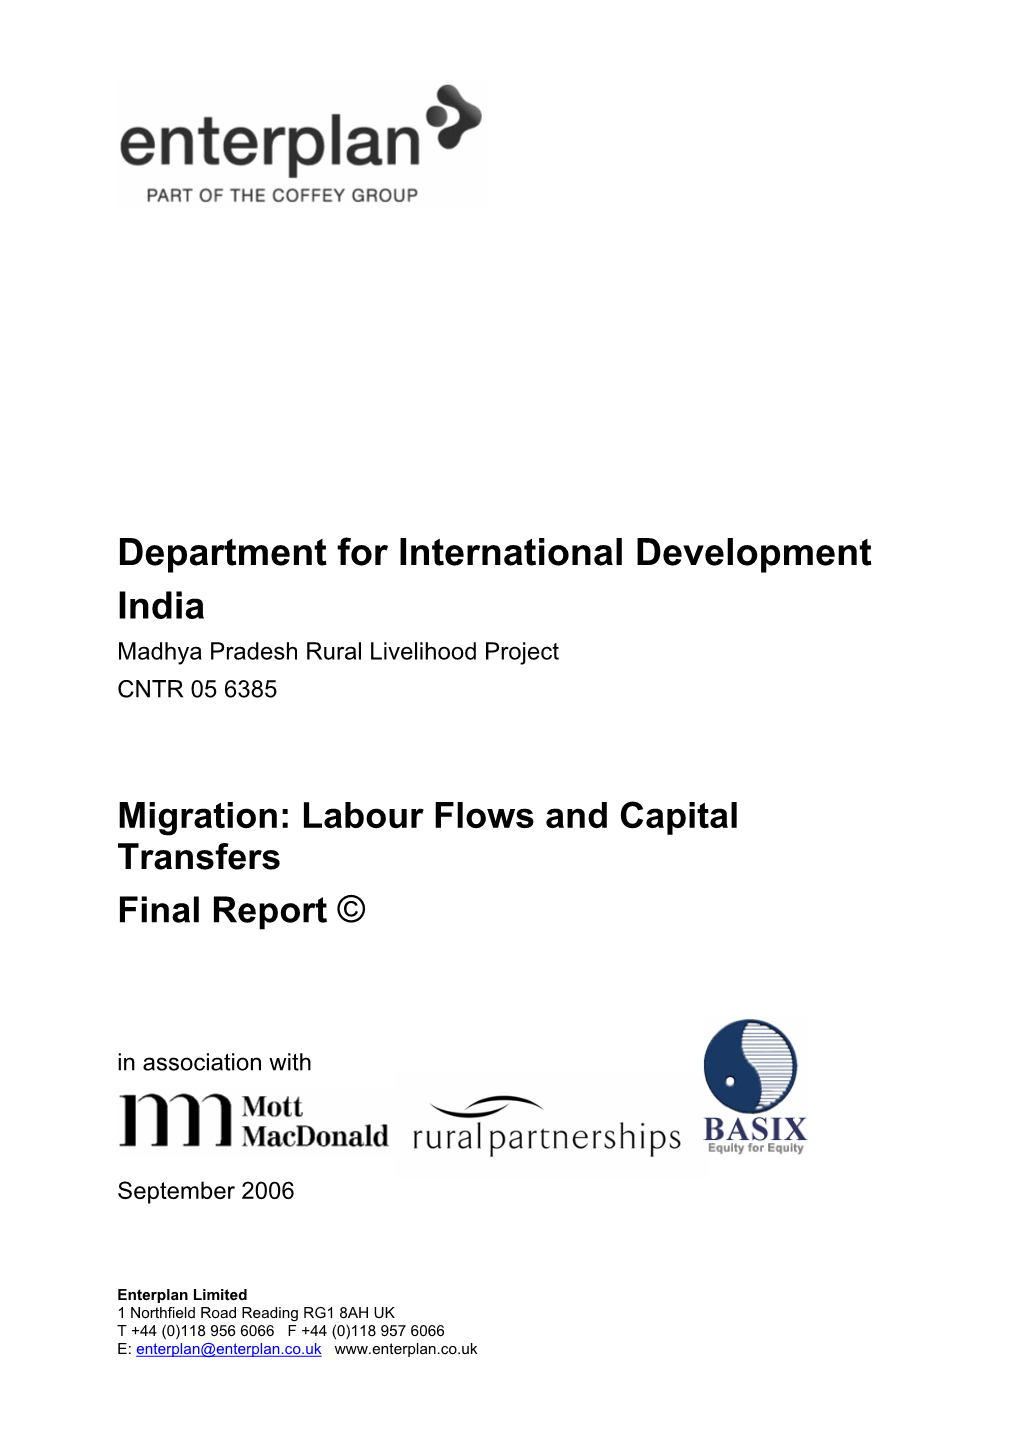 Migration: Labour Flows and Capital Transfers Final Report ©